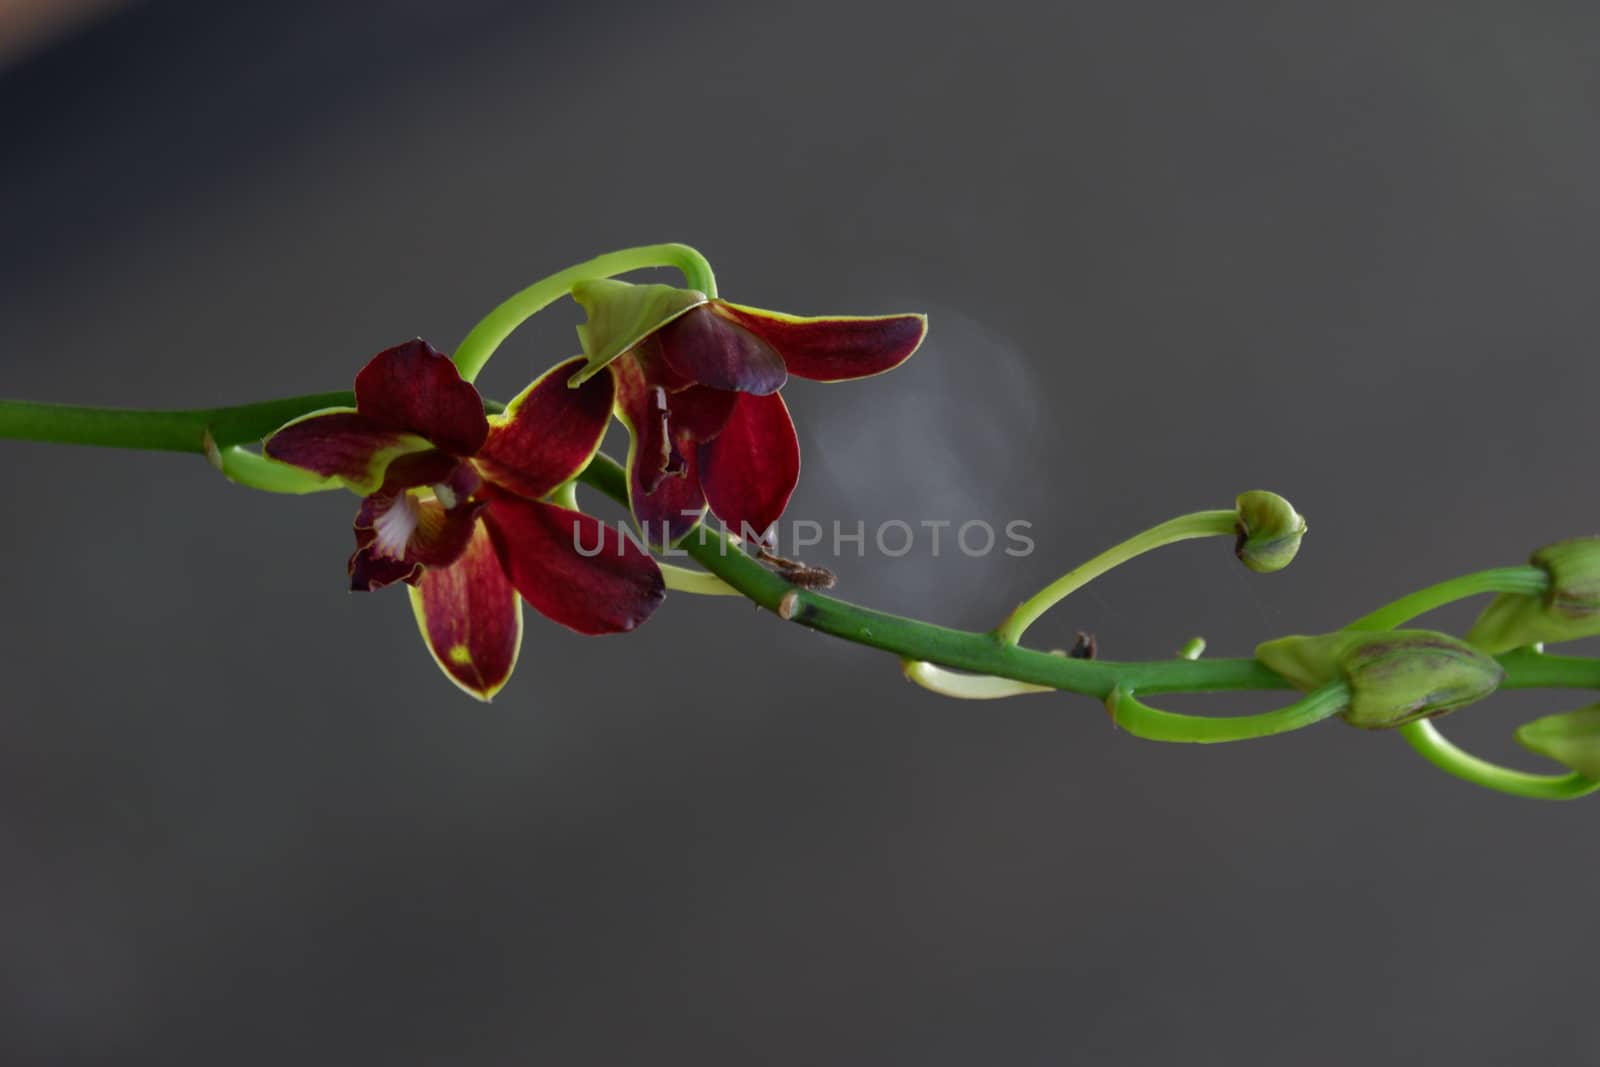 close up image of beautiful dendrobium mangosteen in full bloom has a velvety maroon red color like mangosteen planted in the garden in the garden isolated blur background